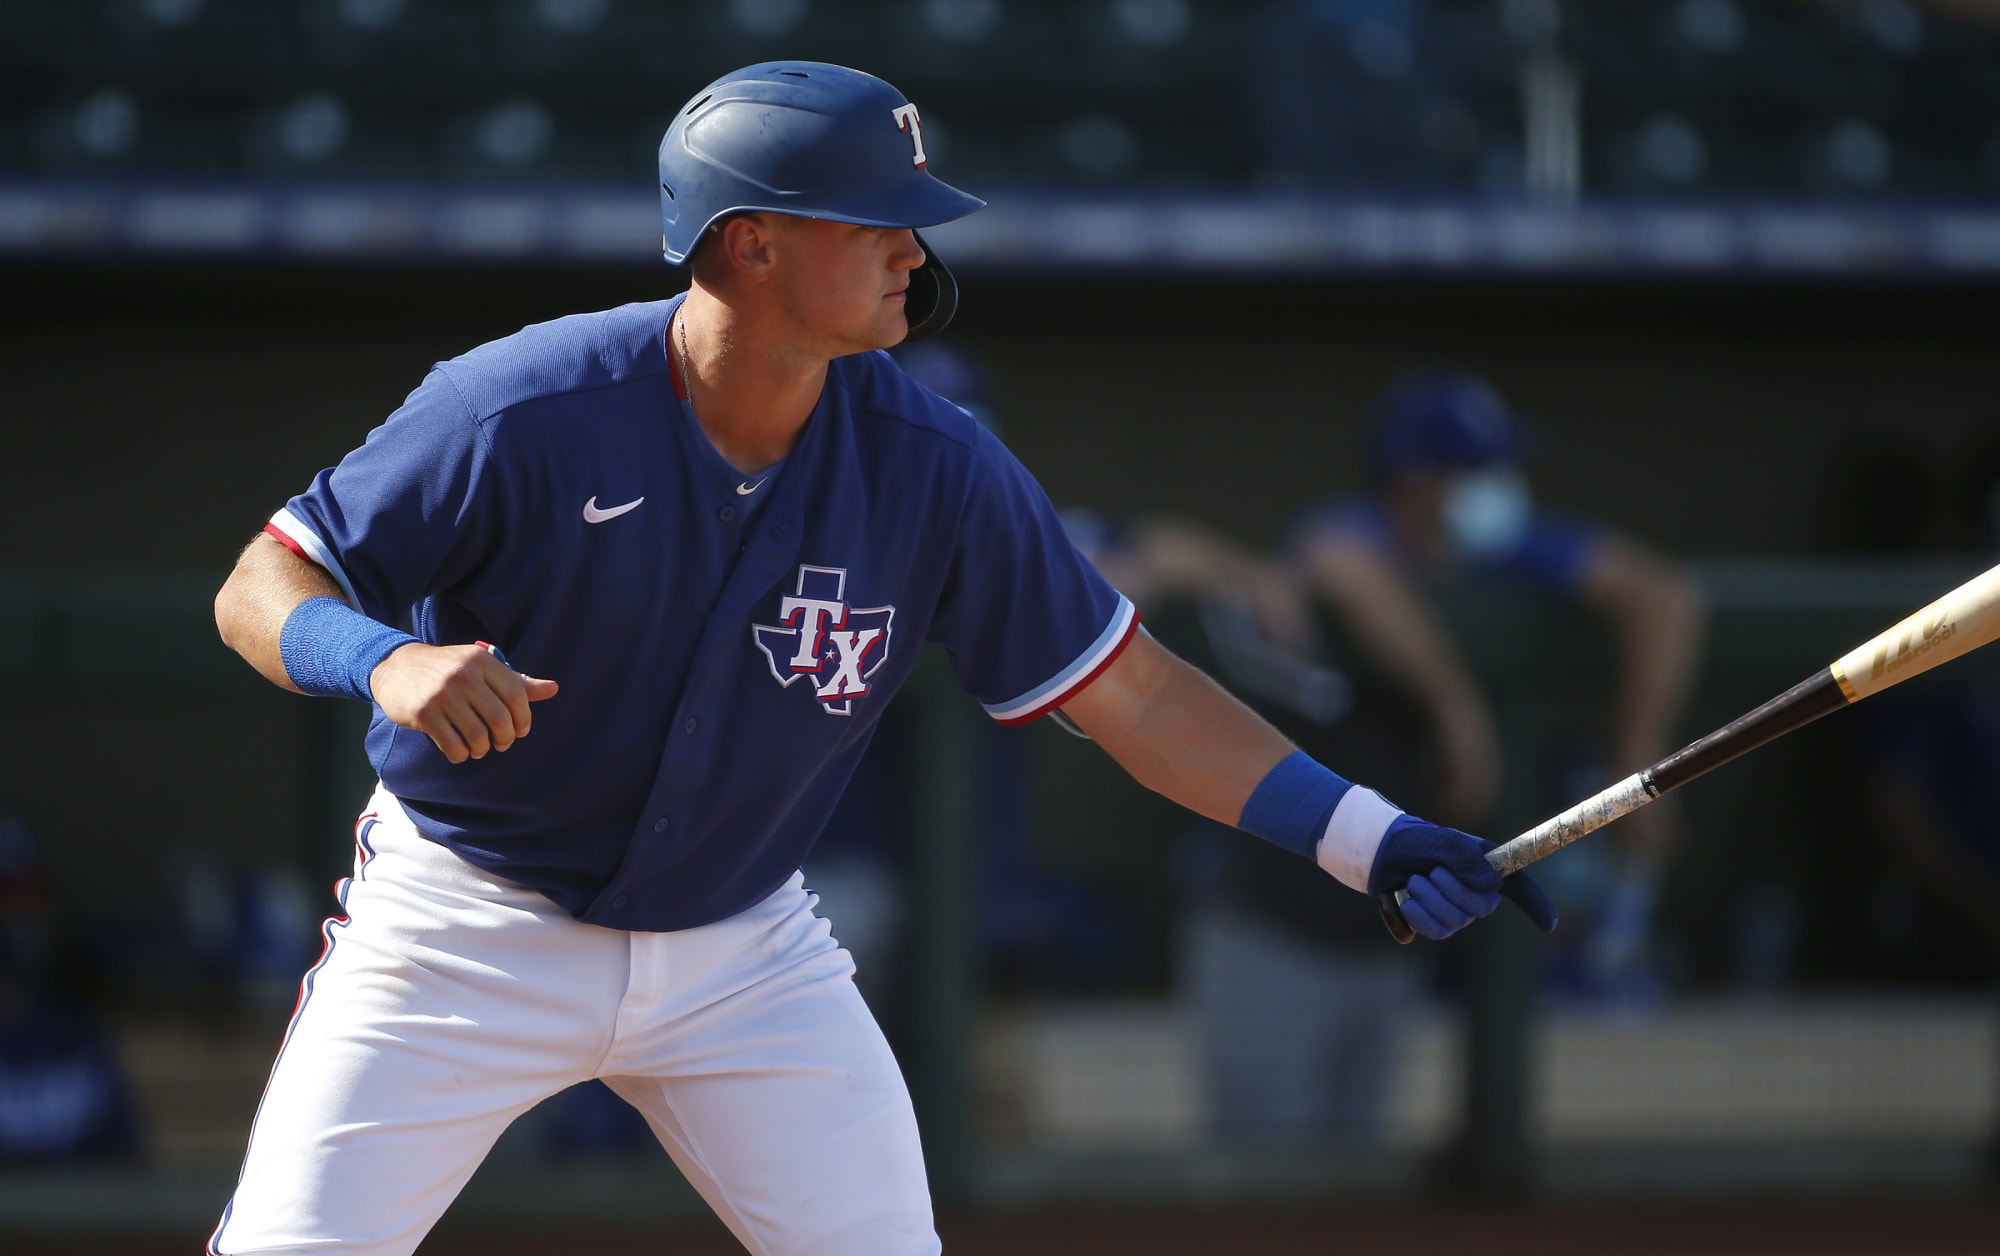 MLB draft series: Texas Tech's Josh Jung is a first-round talent who could  fill an immediate need for the Rangers